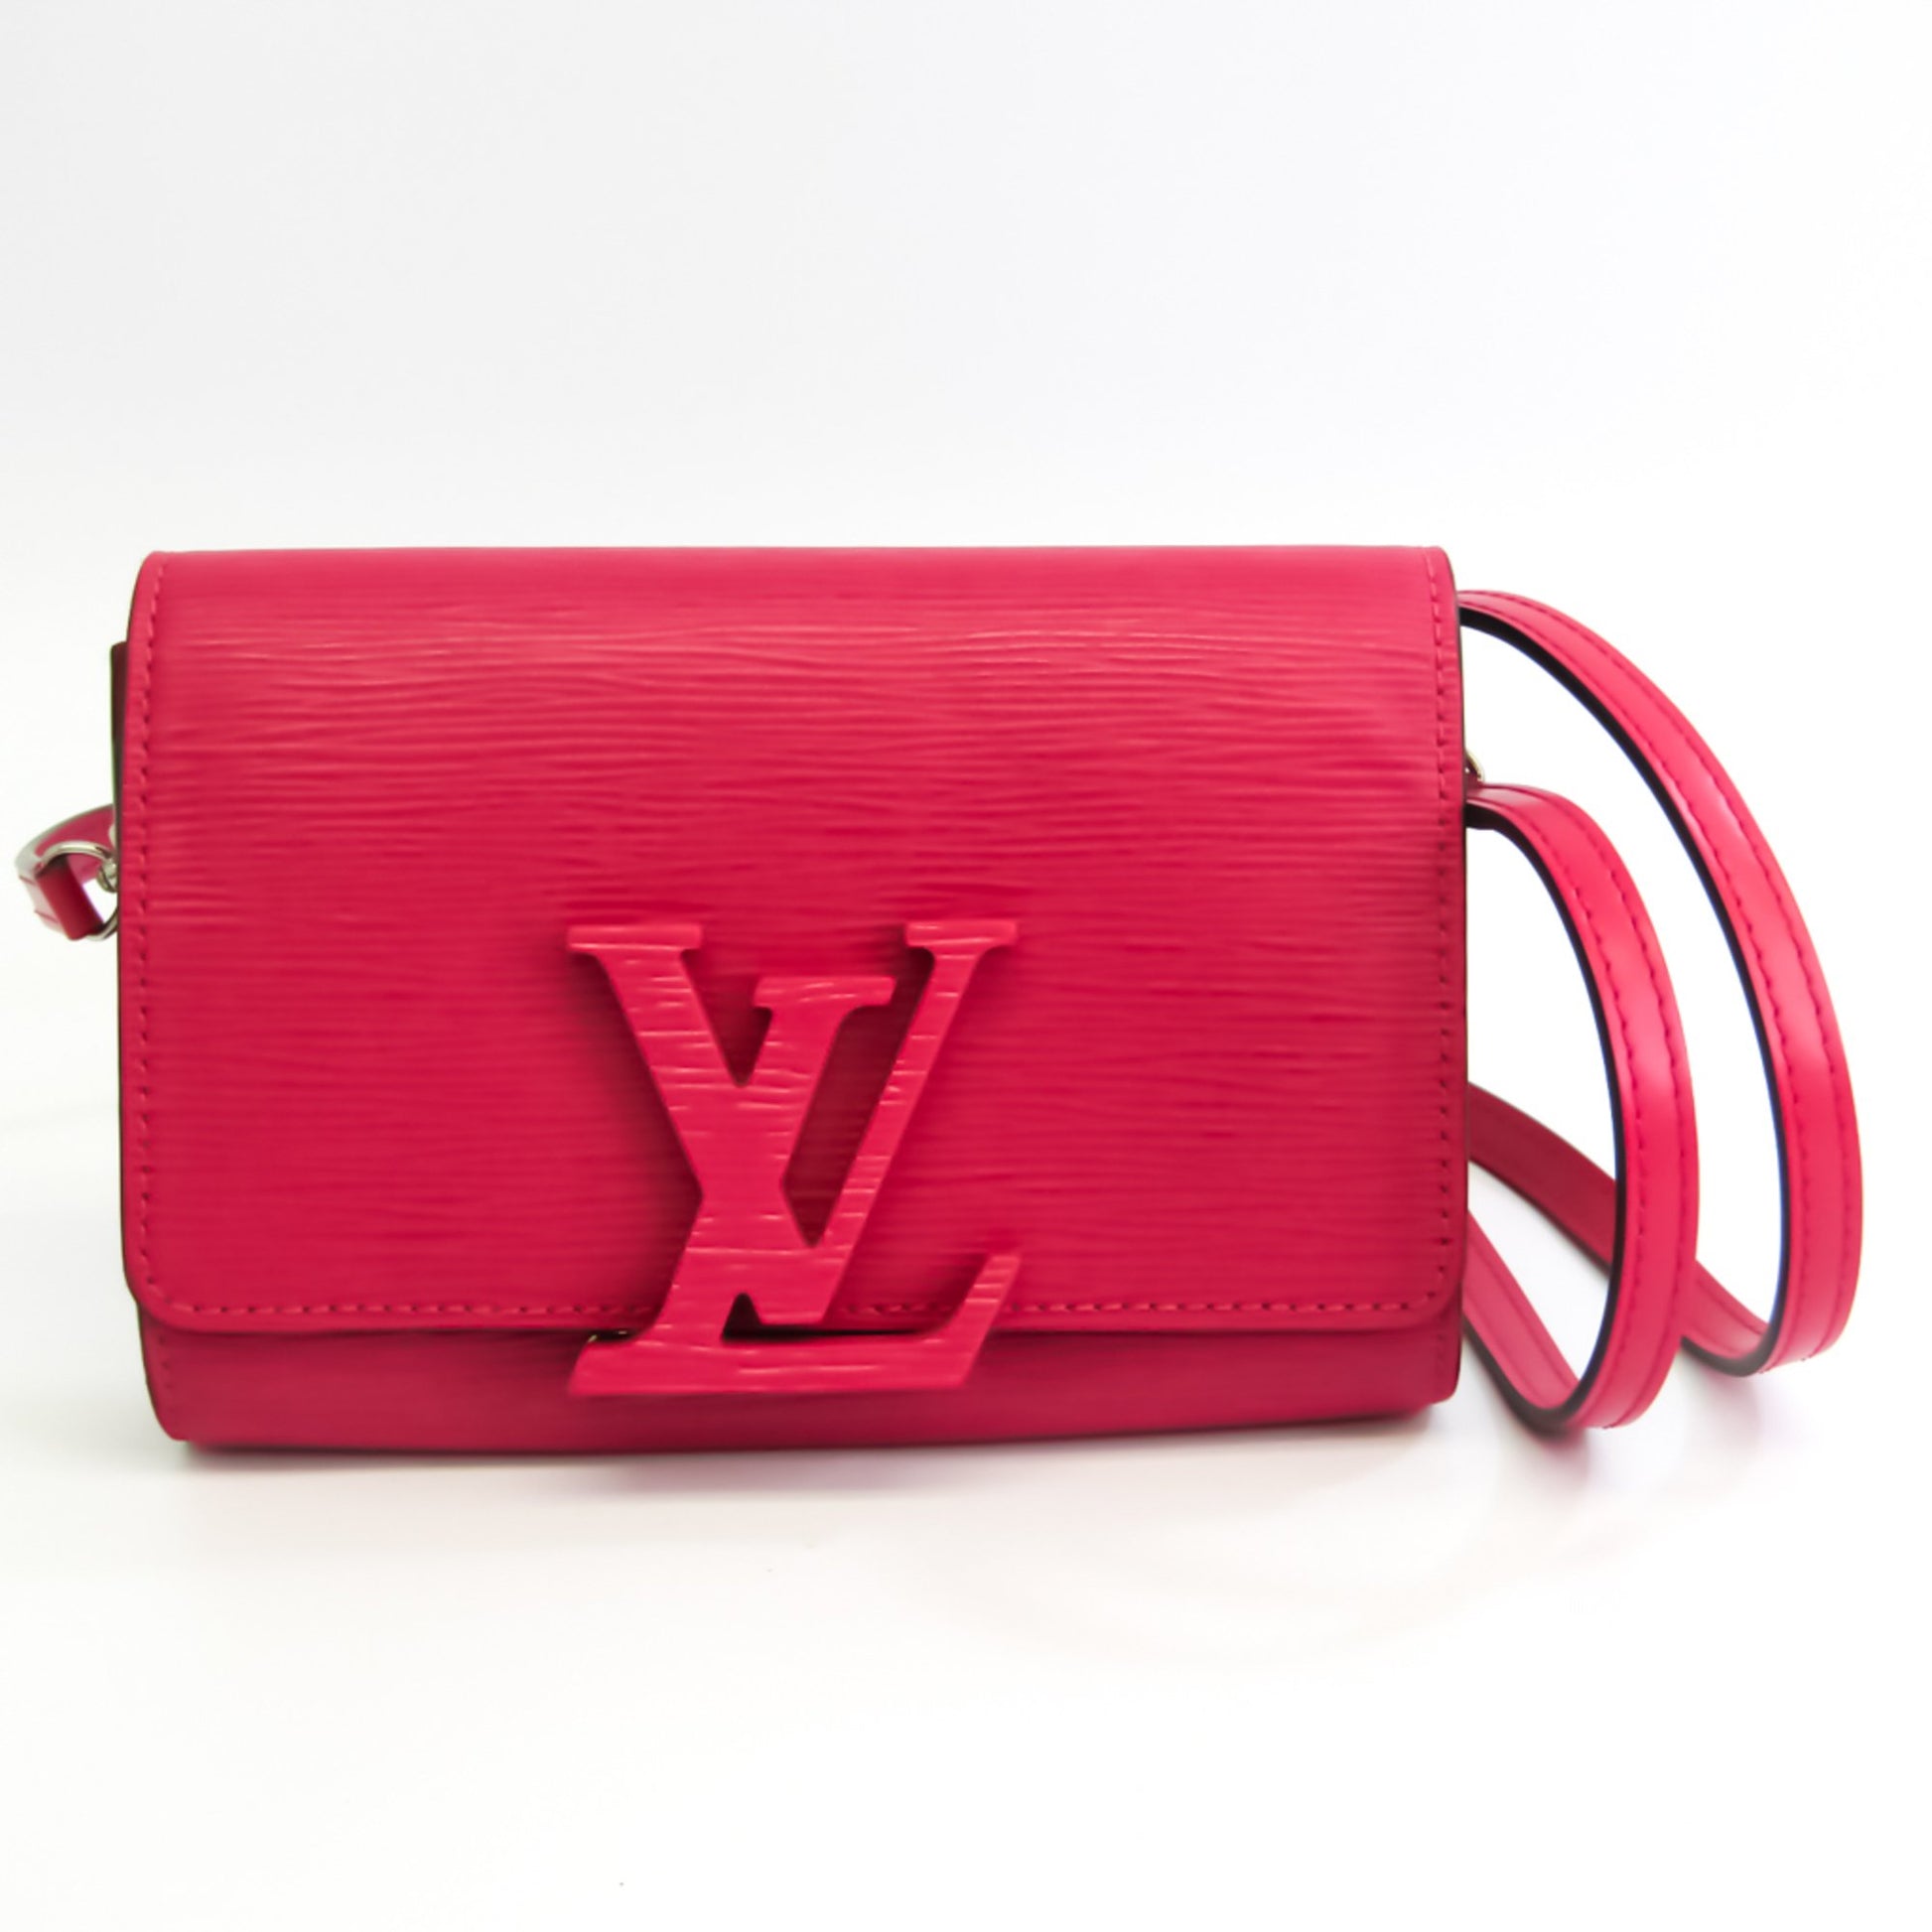 Buy Free Shipping [Bag] LOUIS VUITTON Louis Vuitton Taiga Pochette Voyage  MM Second Bag Clutch Bag Blue Marine Navy Red M63394 from Japan - Buy  authentic Plus exclusive items from Japan